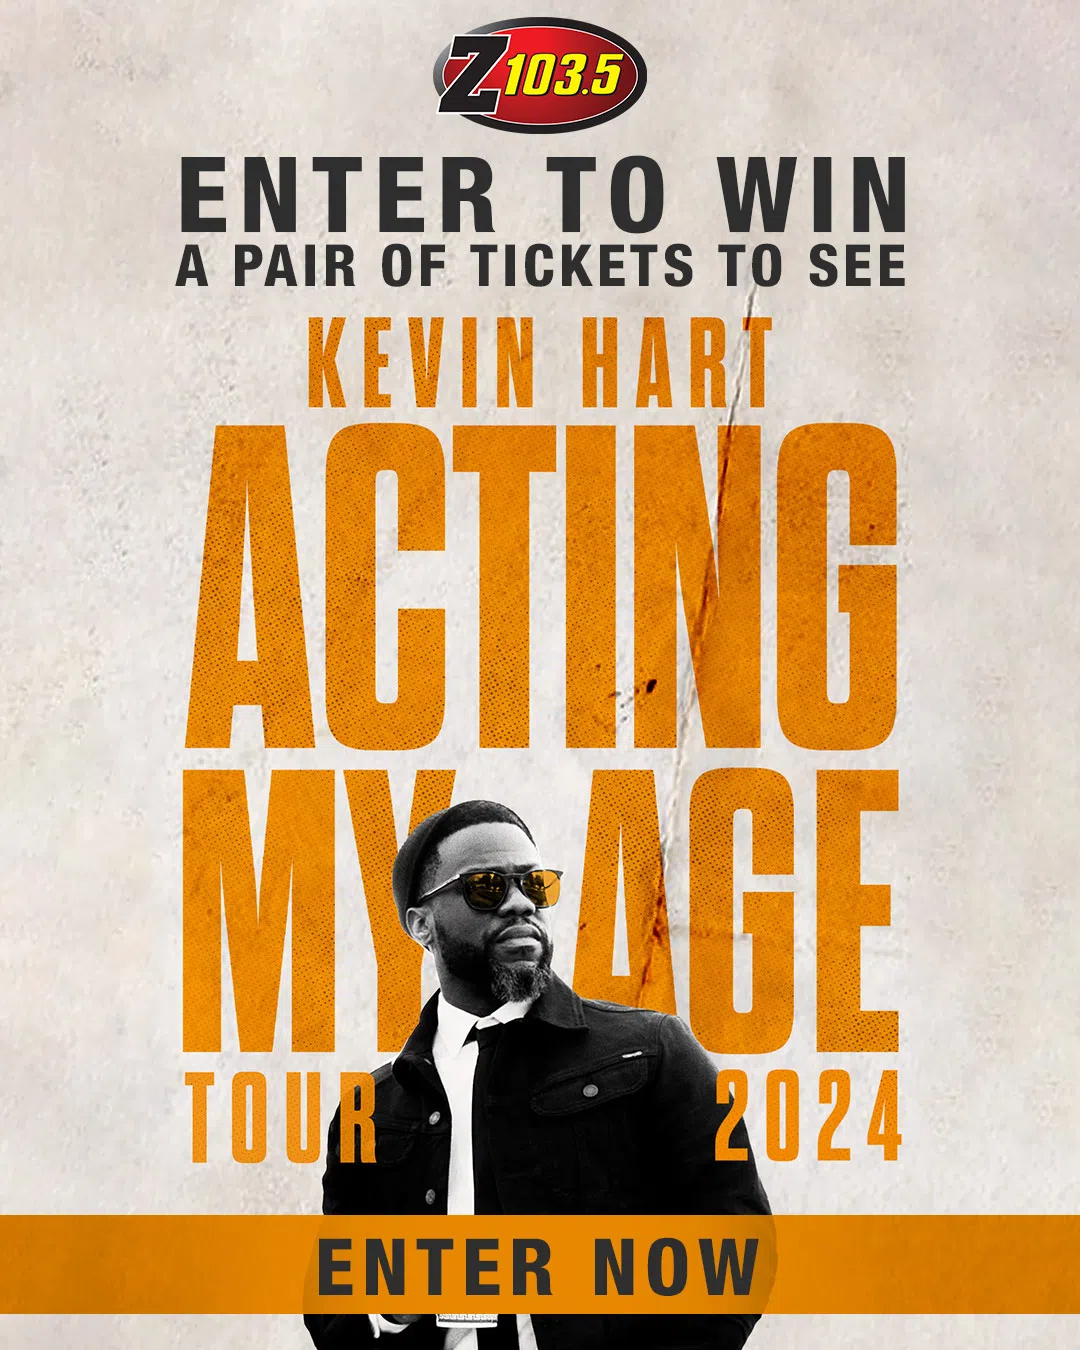 Feature: https://z1035.com/win/win-a-pair-of-tickets-to-see-kevin-hart/